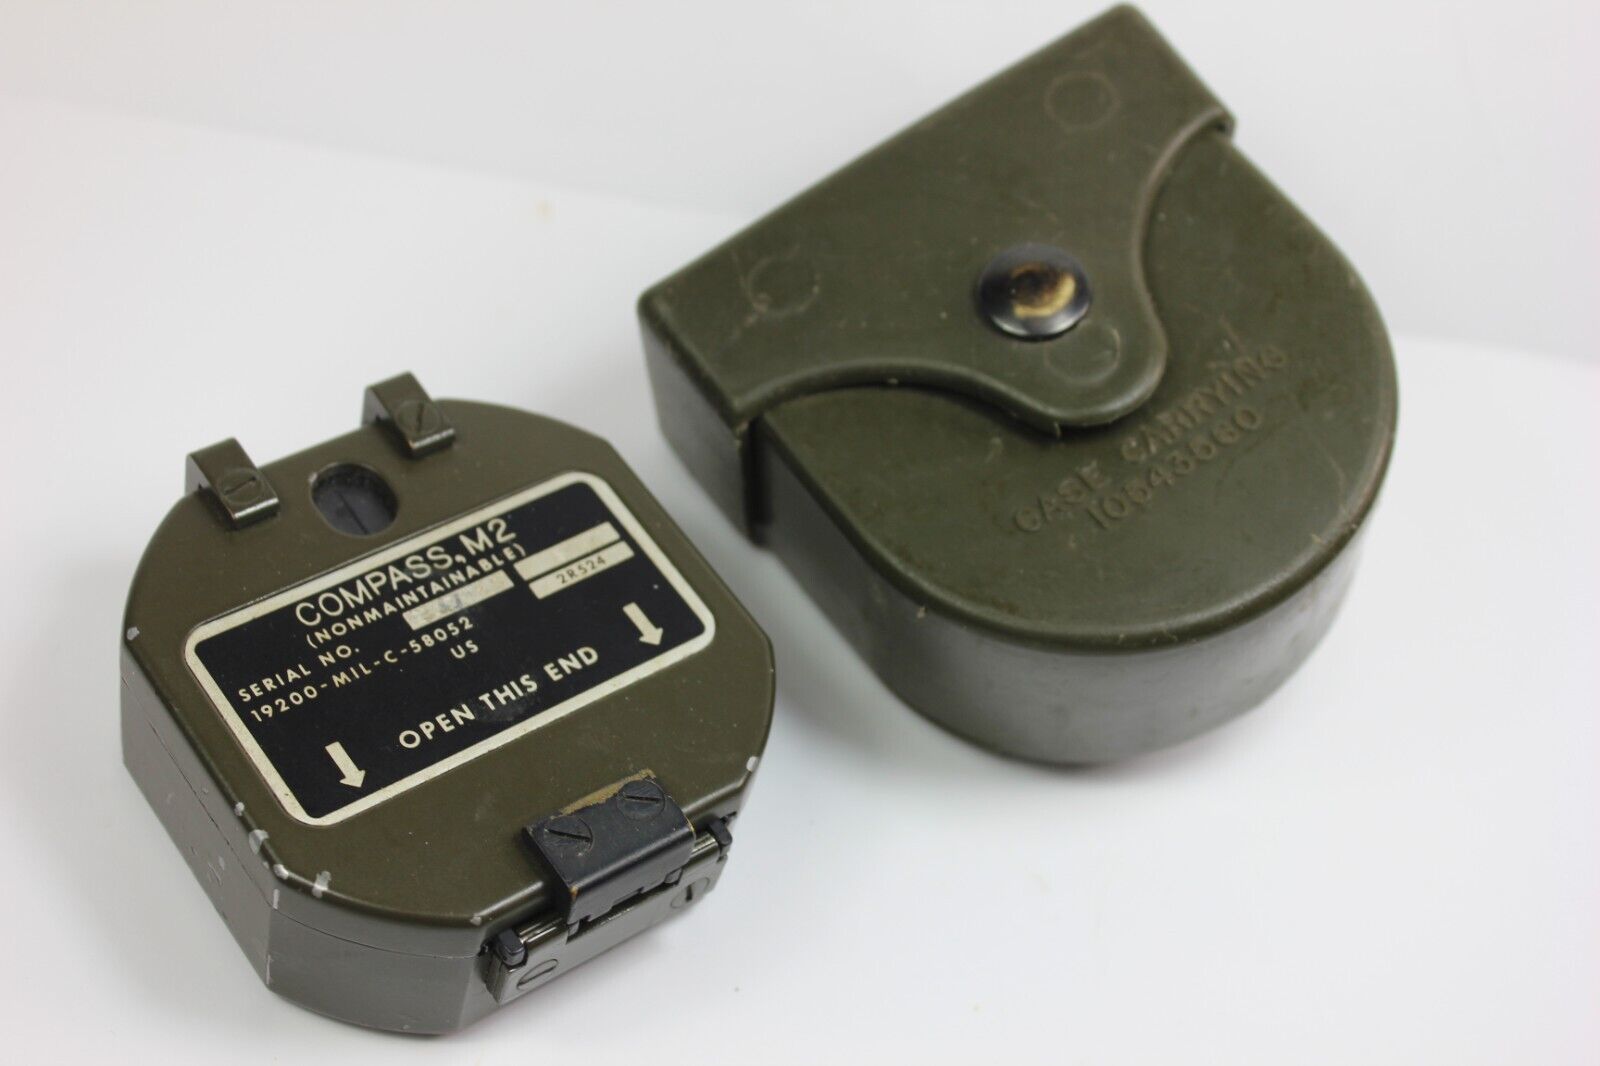 Original Vintage US Army M-2 Compass Serial # 217166 w/ Carrying Case 10543560